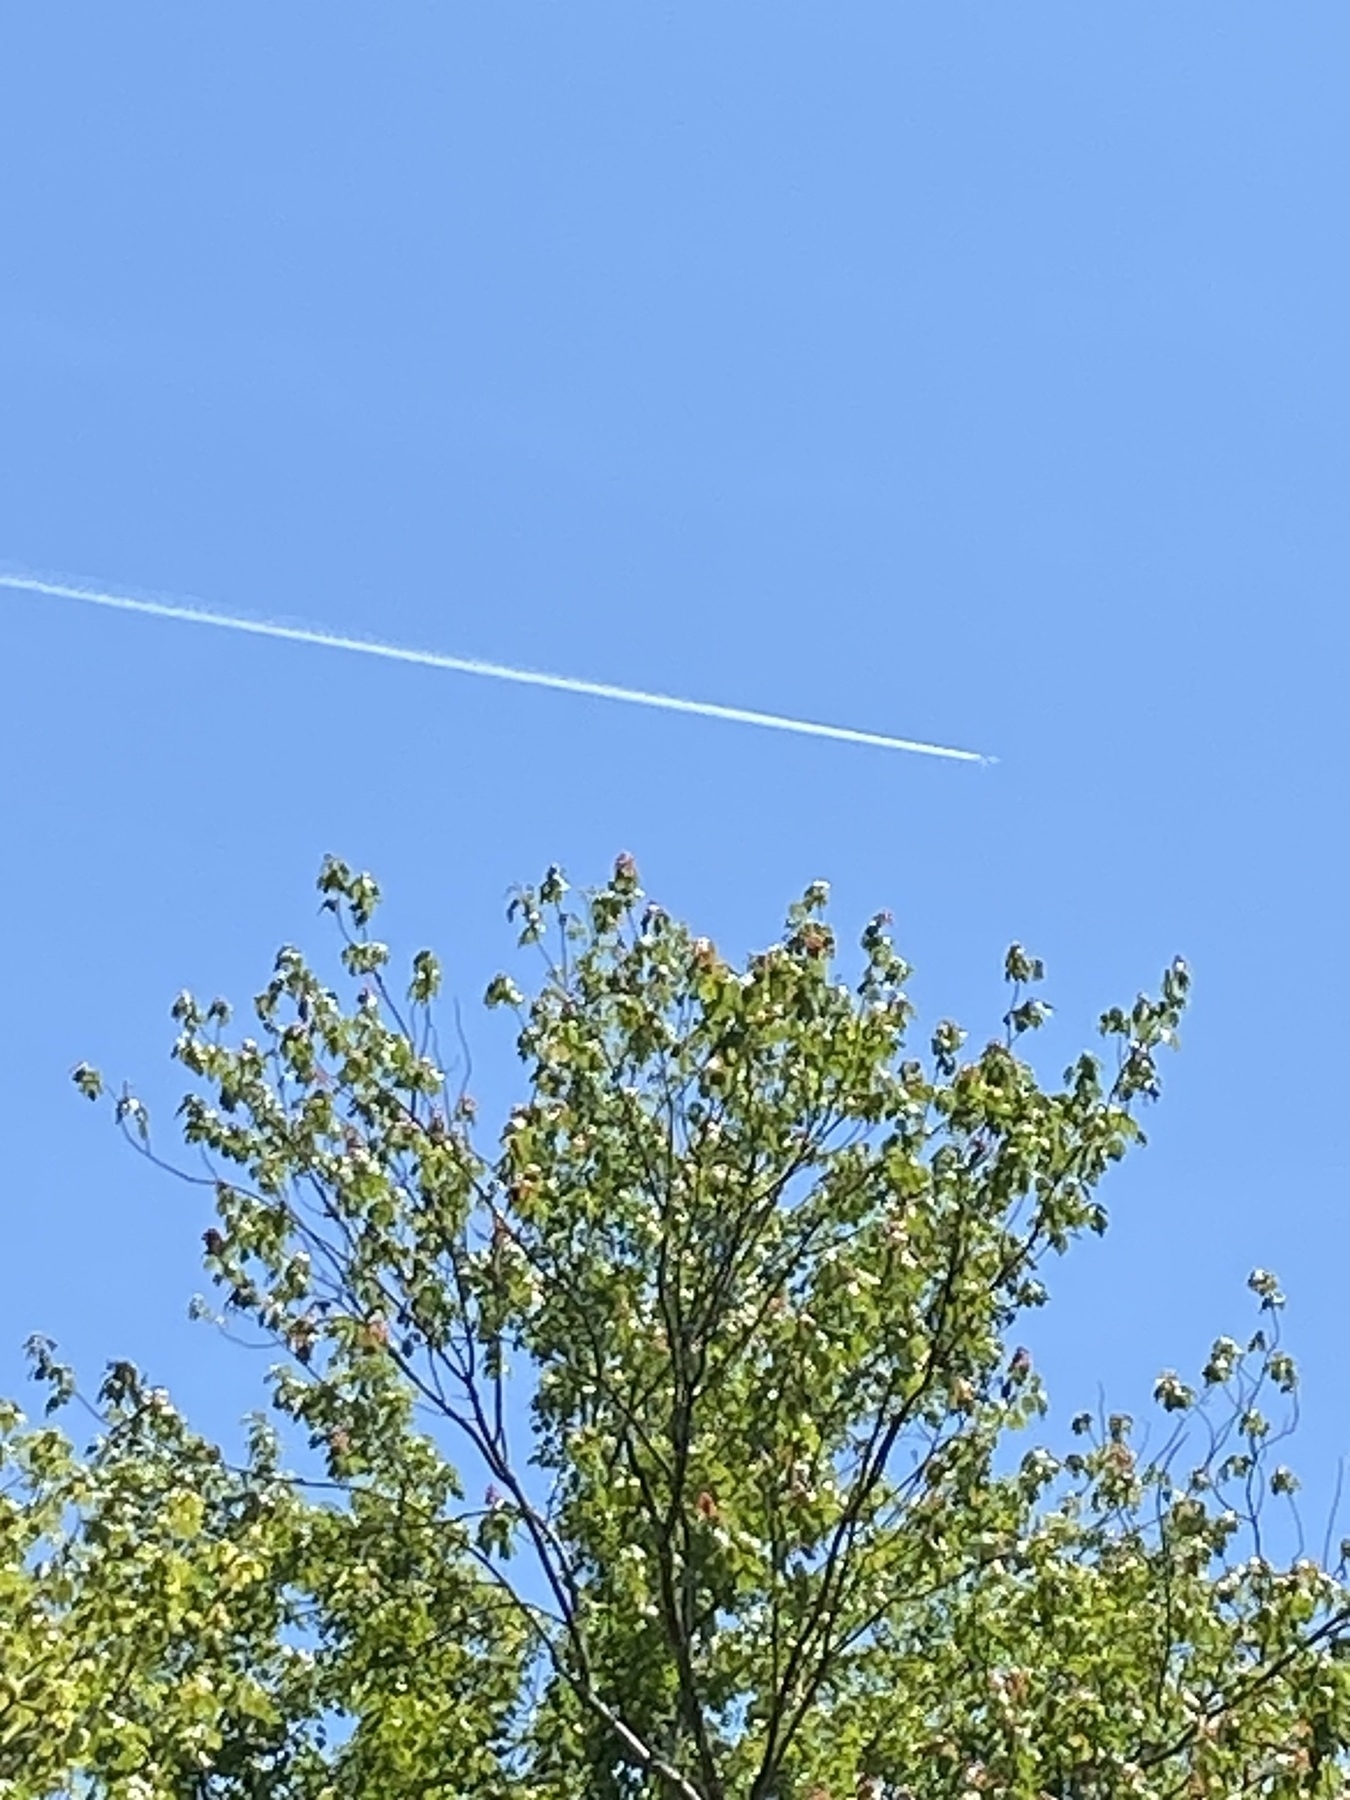 Picture of a jet condensation trail with the top of a tree in the foreground.